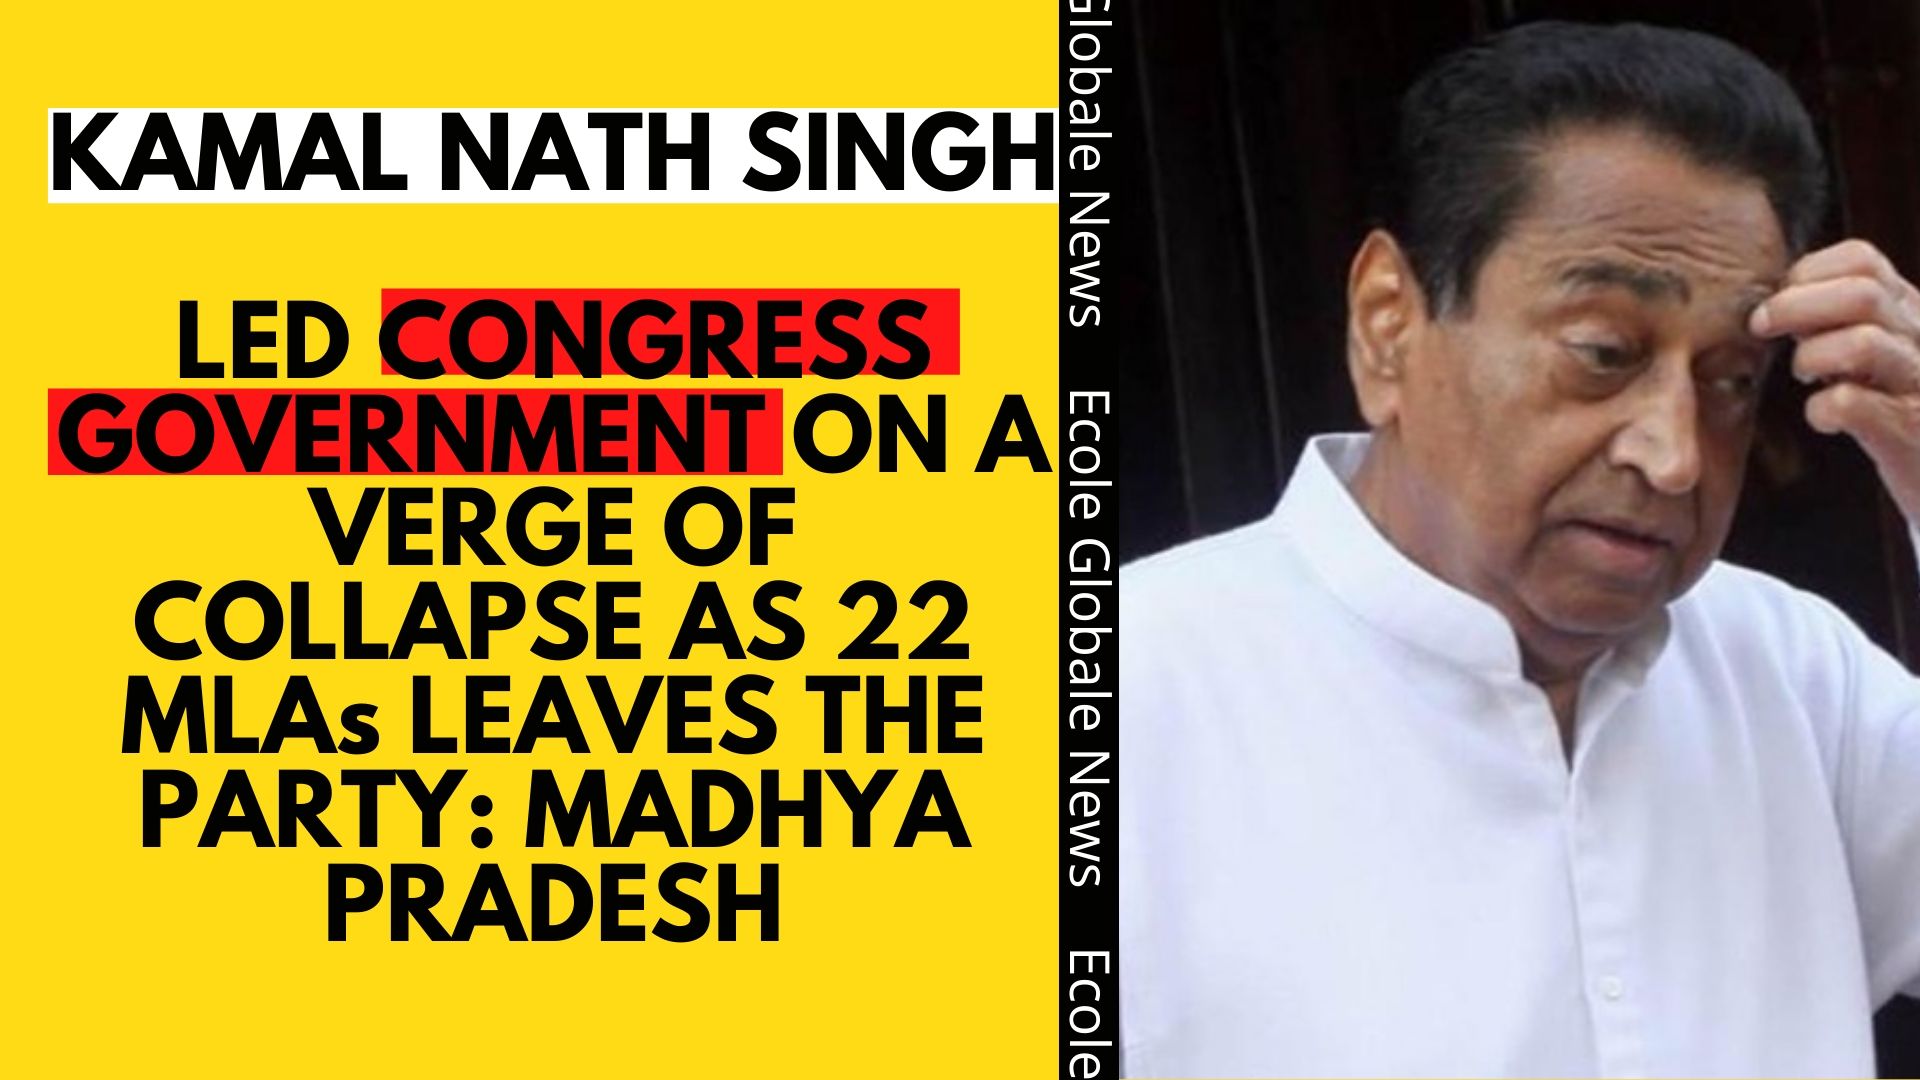 You are currently viewing KAMAL NATH SINGH LED CONGRESS GOVERNMENT ON A VERGE OF COLLAPSE AS 22 MLAs LEAVES THE PARTY: MADHYA PRADESH